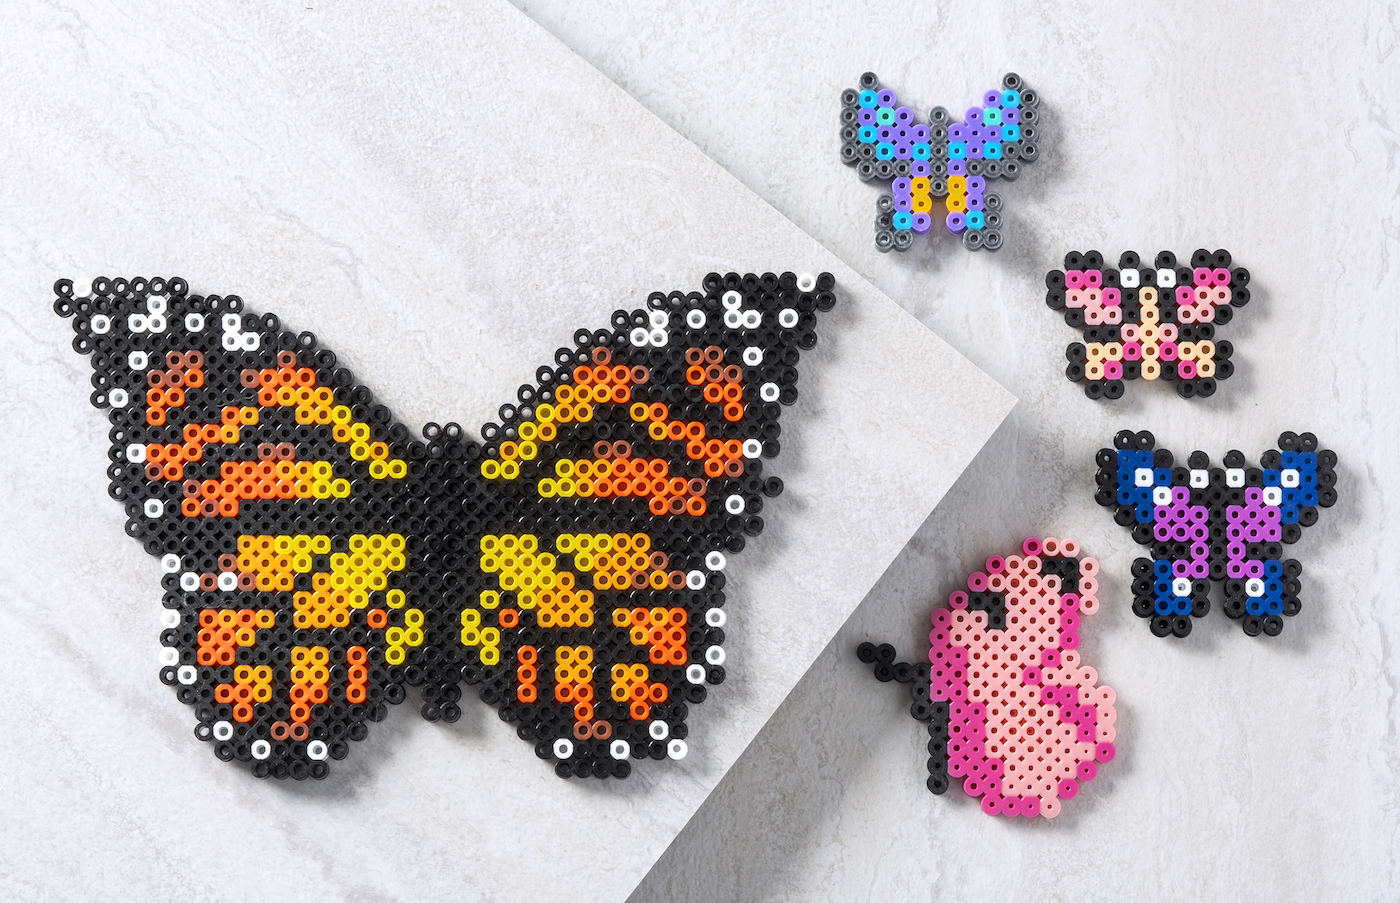 8 Bright, Colourful Butterflies From Our Colourful Collection. 3d